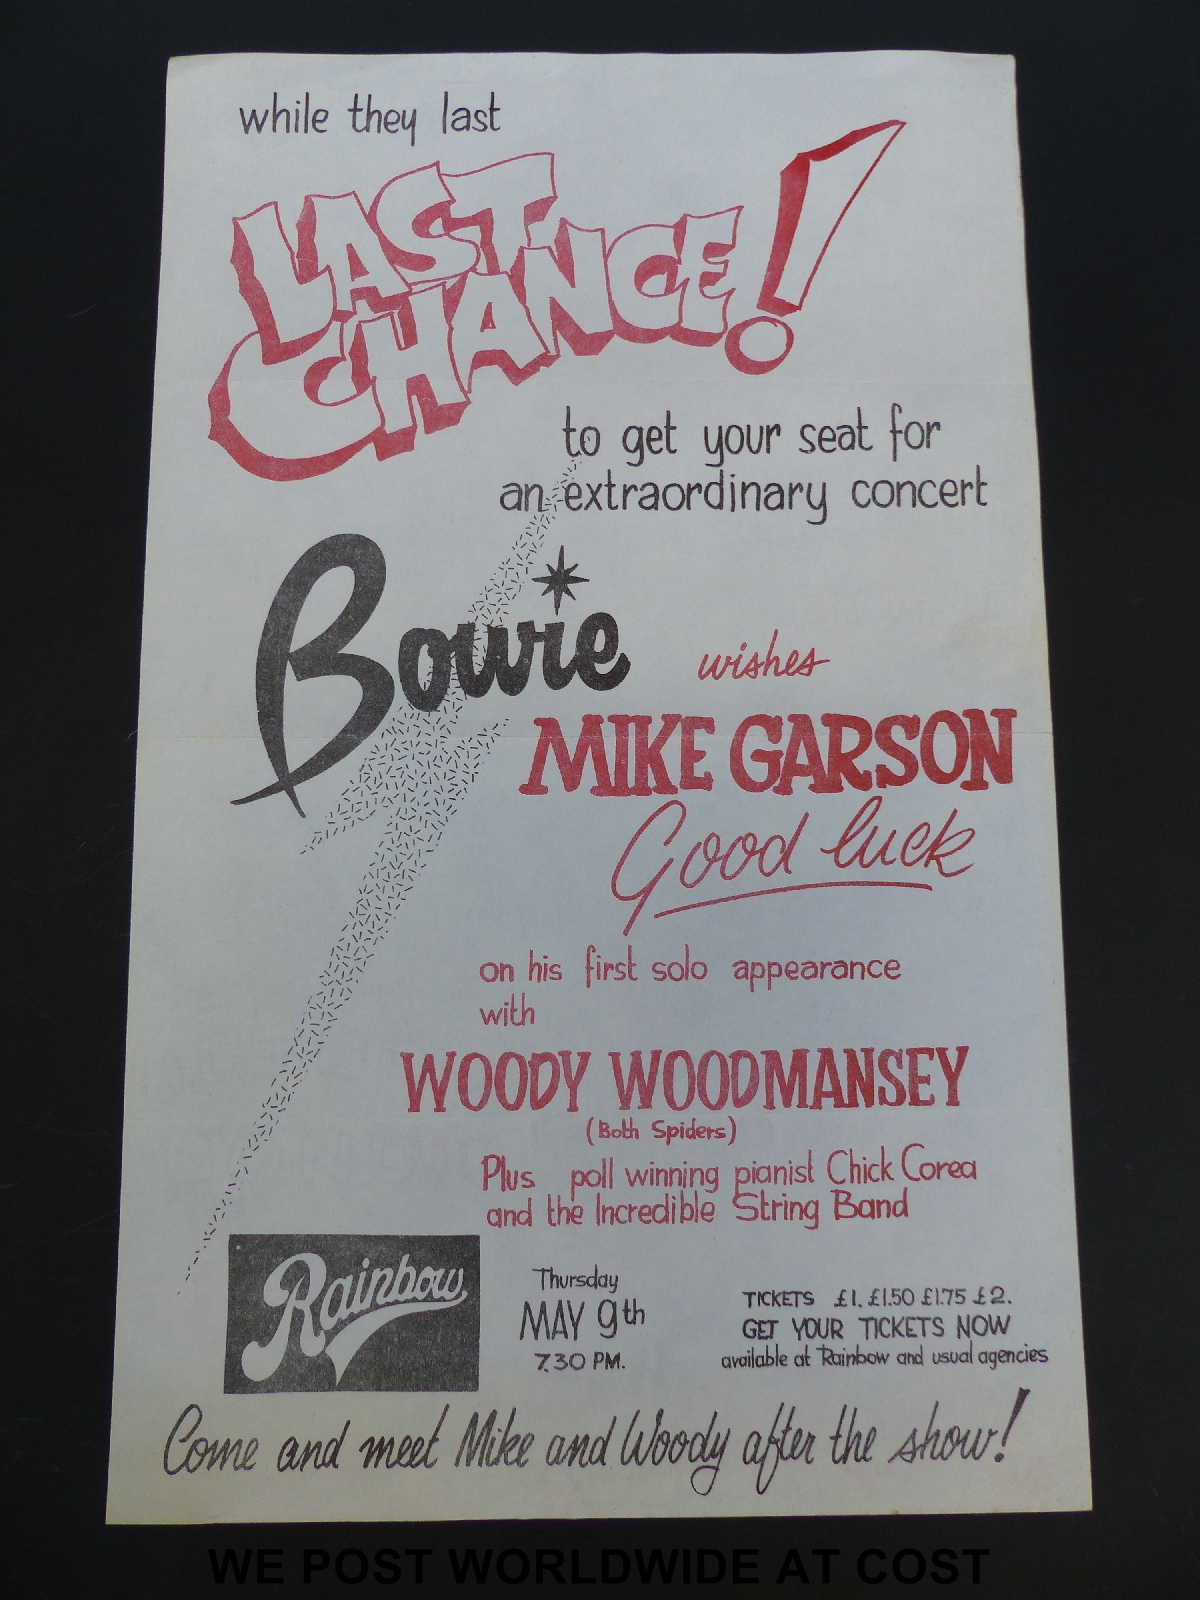 A 1974 poster flyer for Mike Garson and Woody Woodmansey at Rainbow